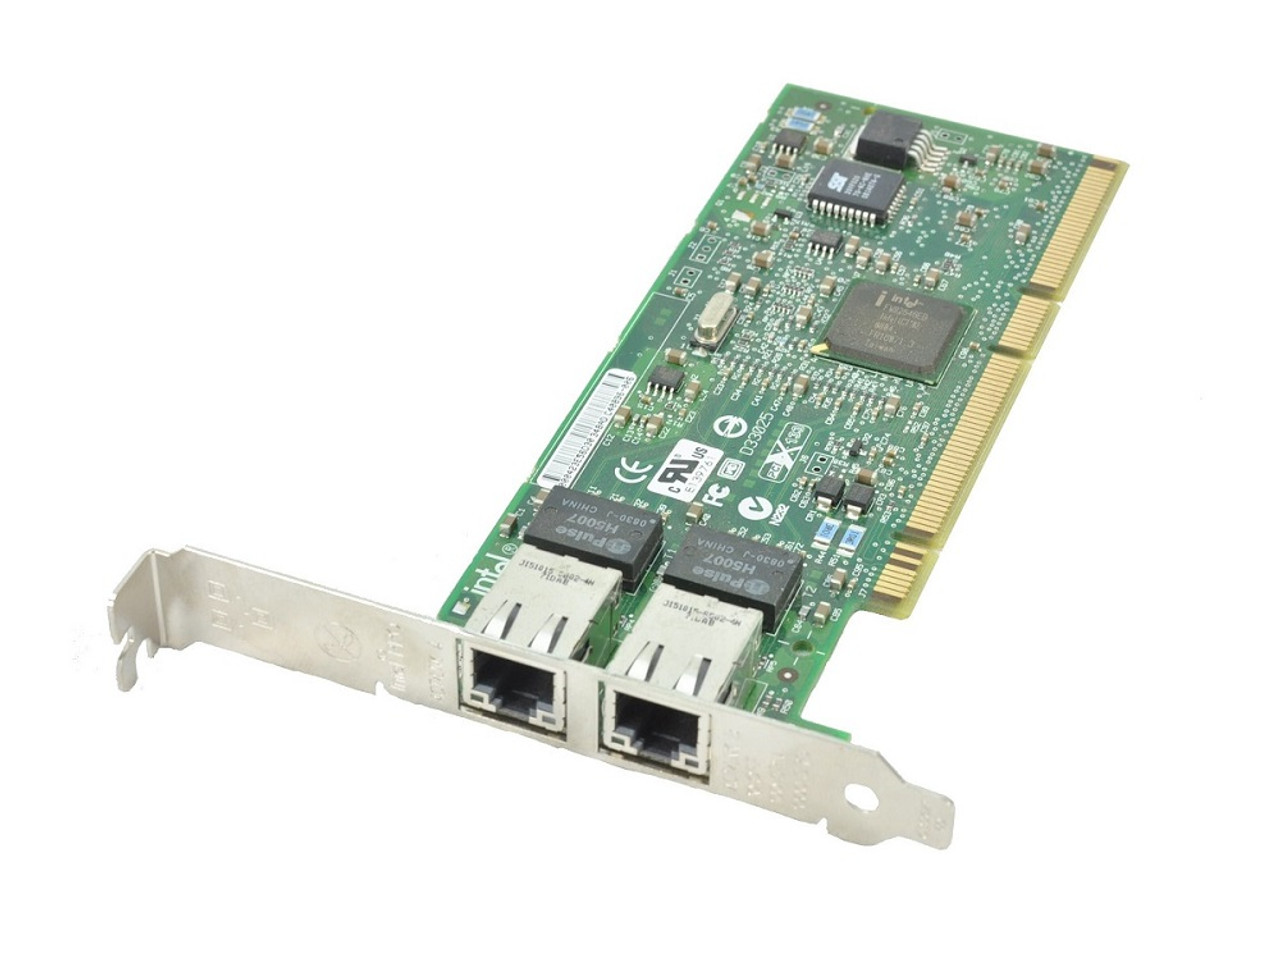 05JRW8 - Dell Intel X540 Dp - Network Adapter - 10GB Ethernet X 2 - With Intel I350 Dp Network Daughter Card